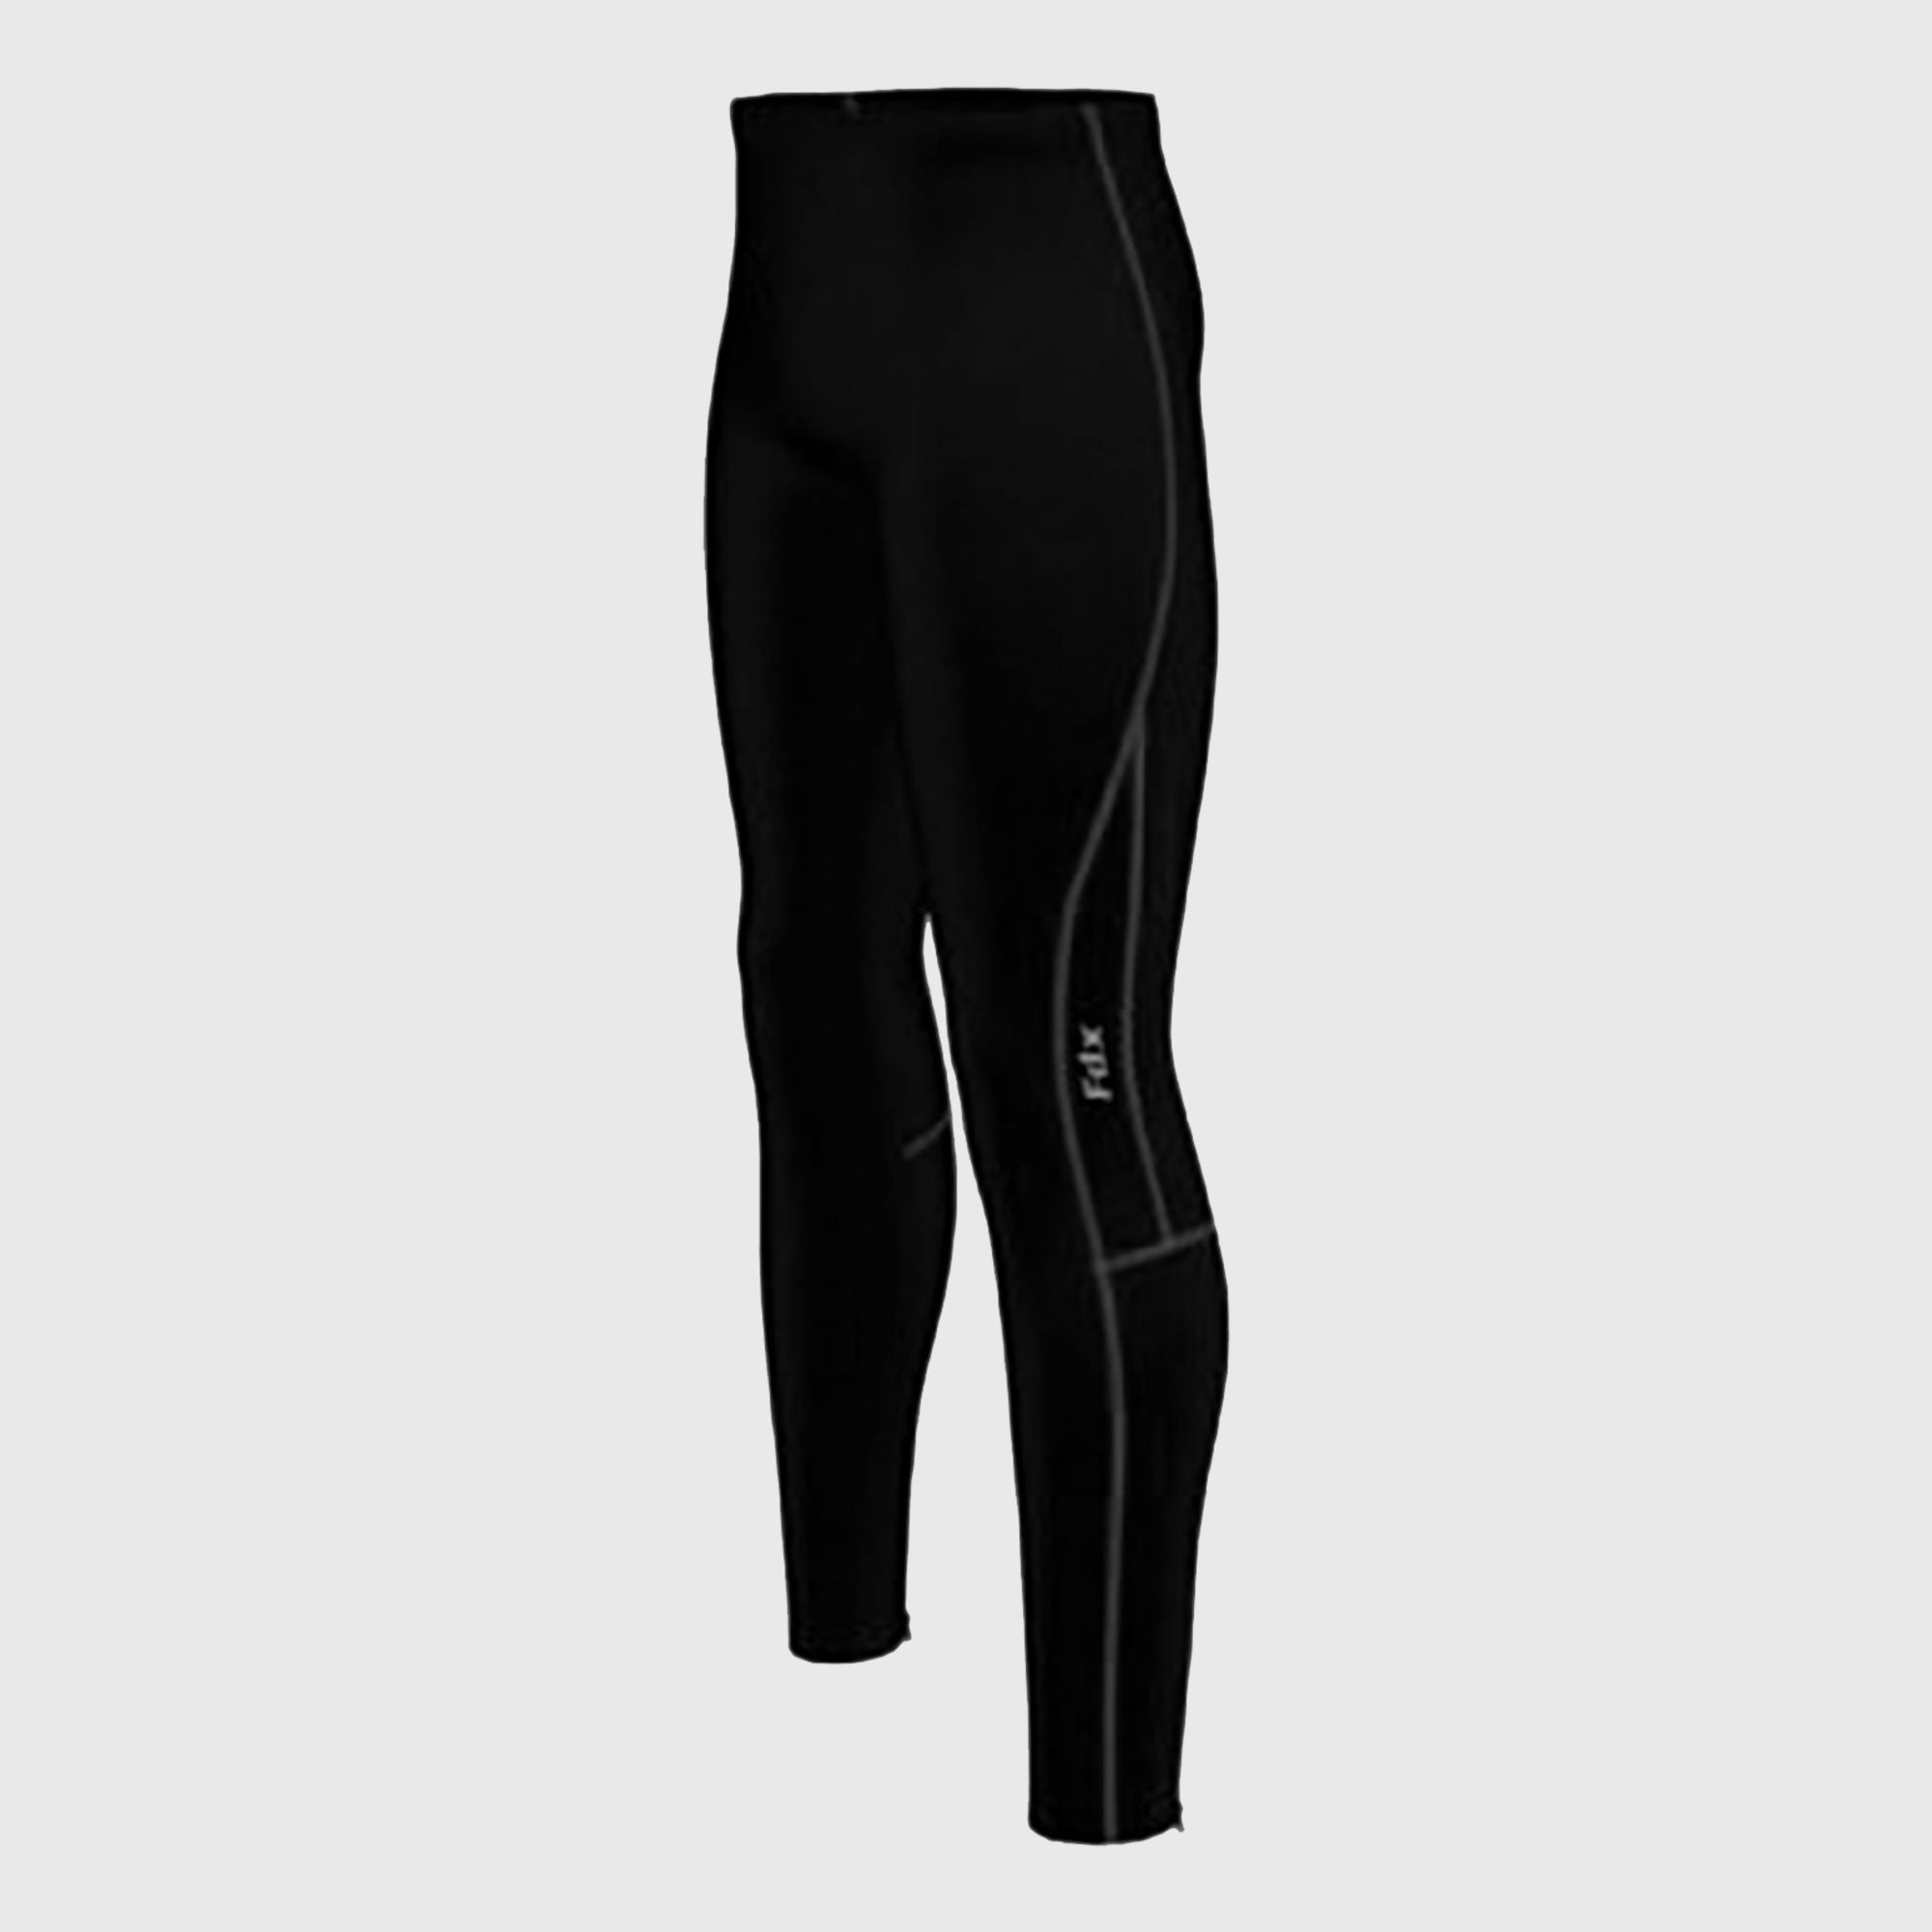 compression tight cycling for men sport running basketball#5808